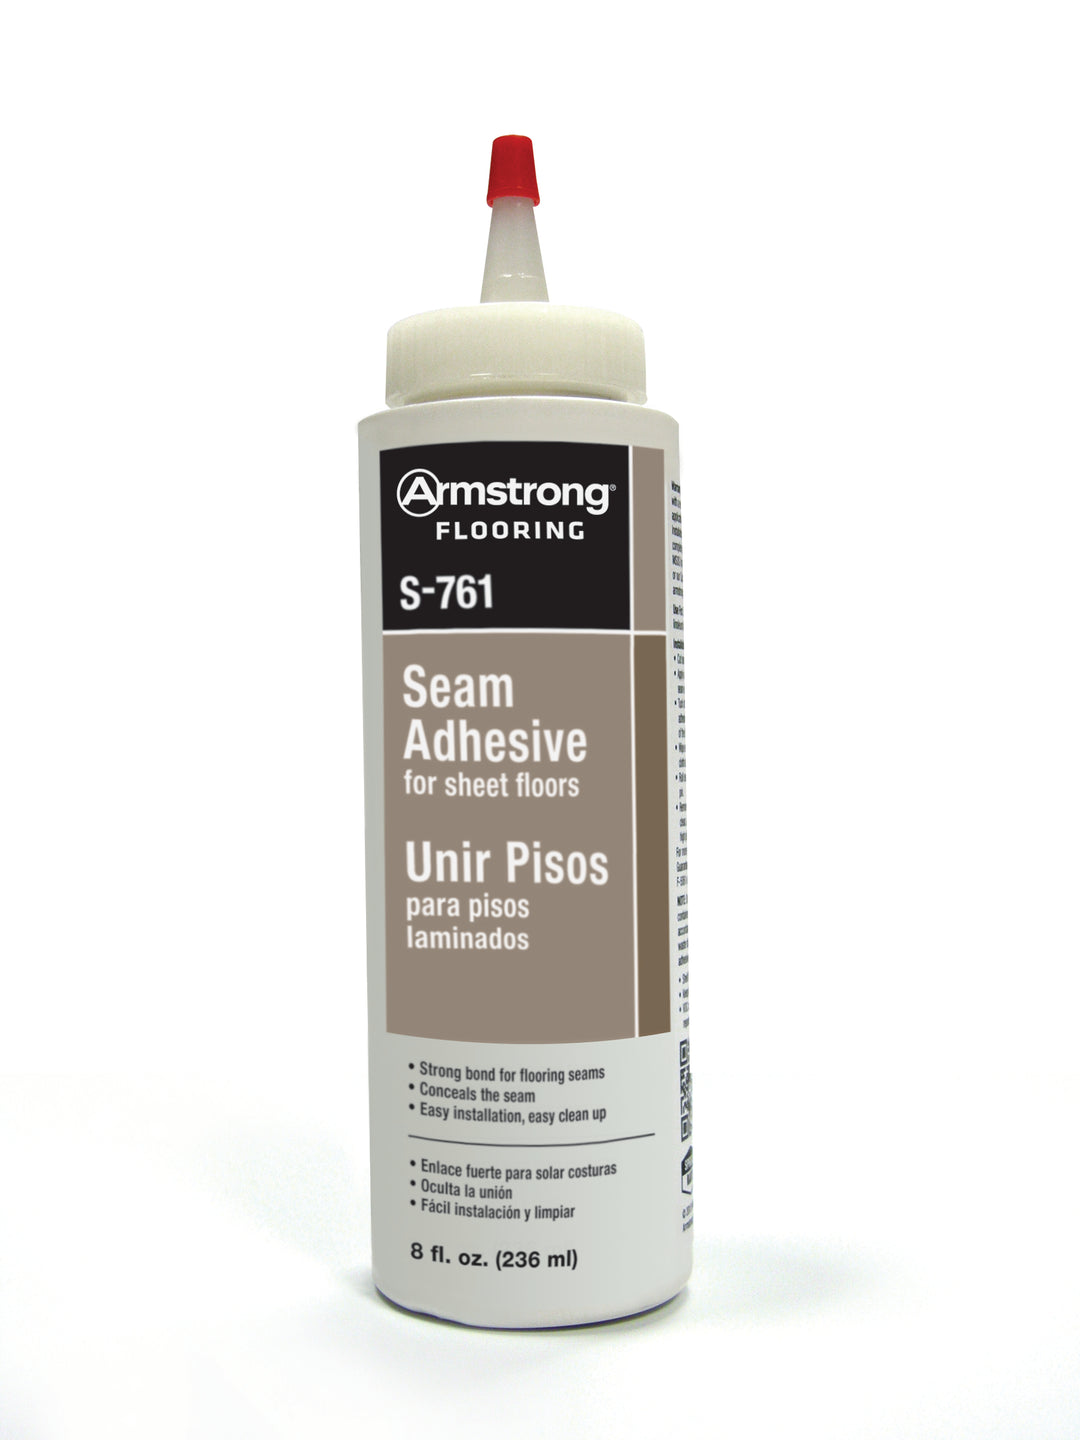 S-761 Seam Adhesive Armstrong